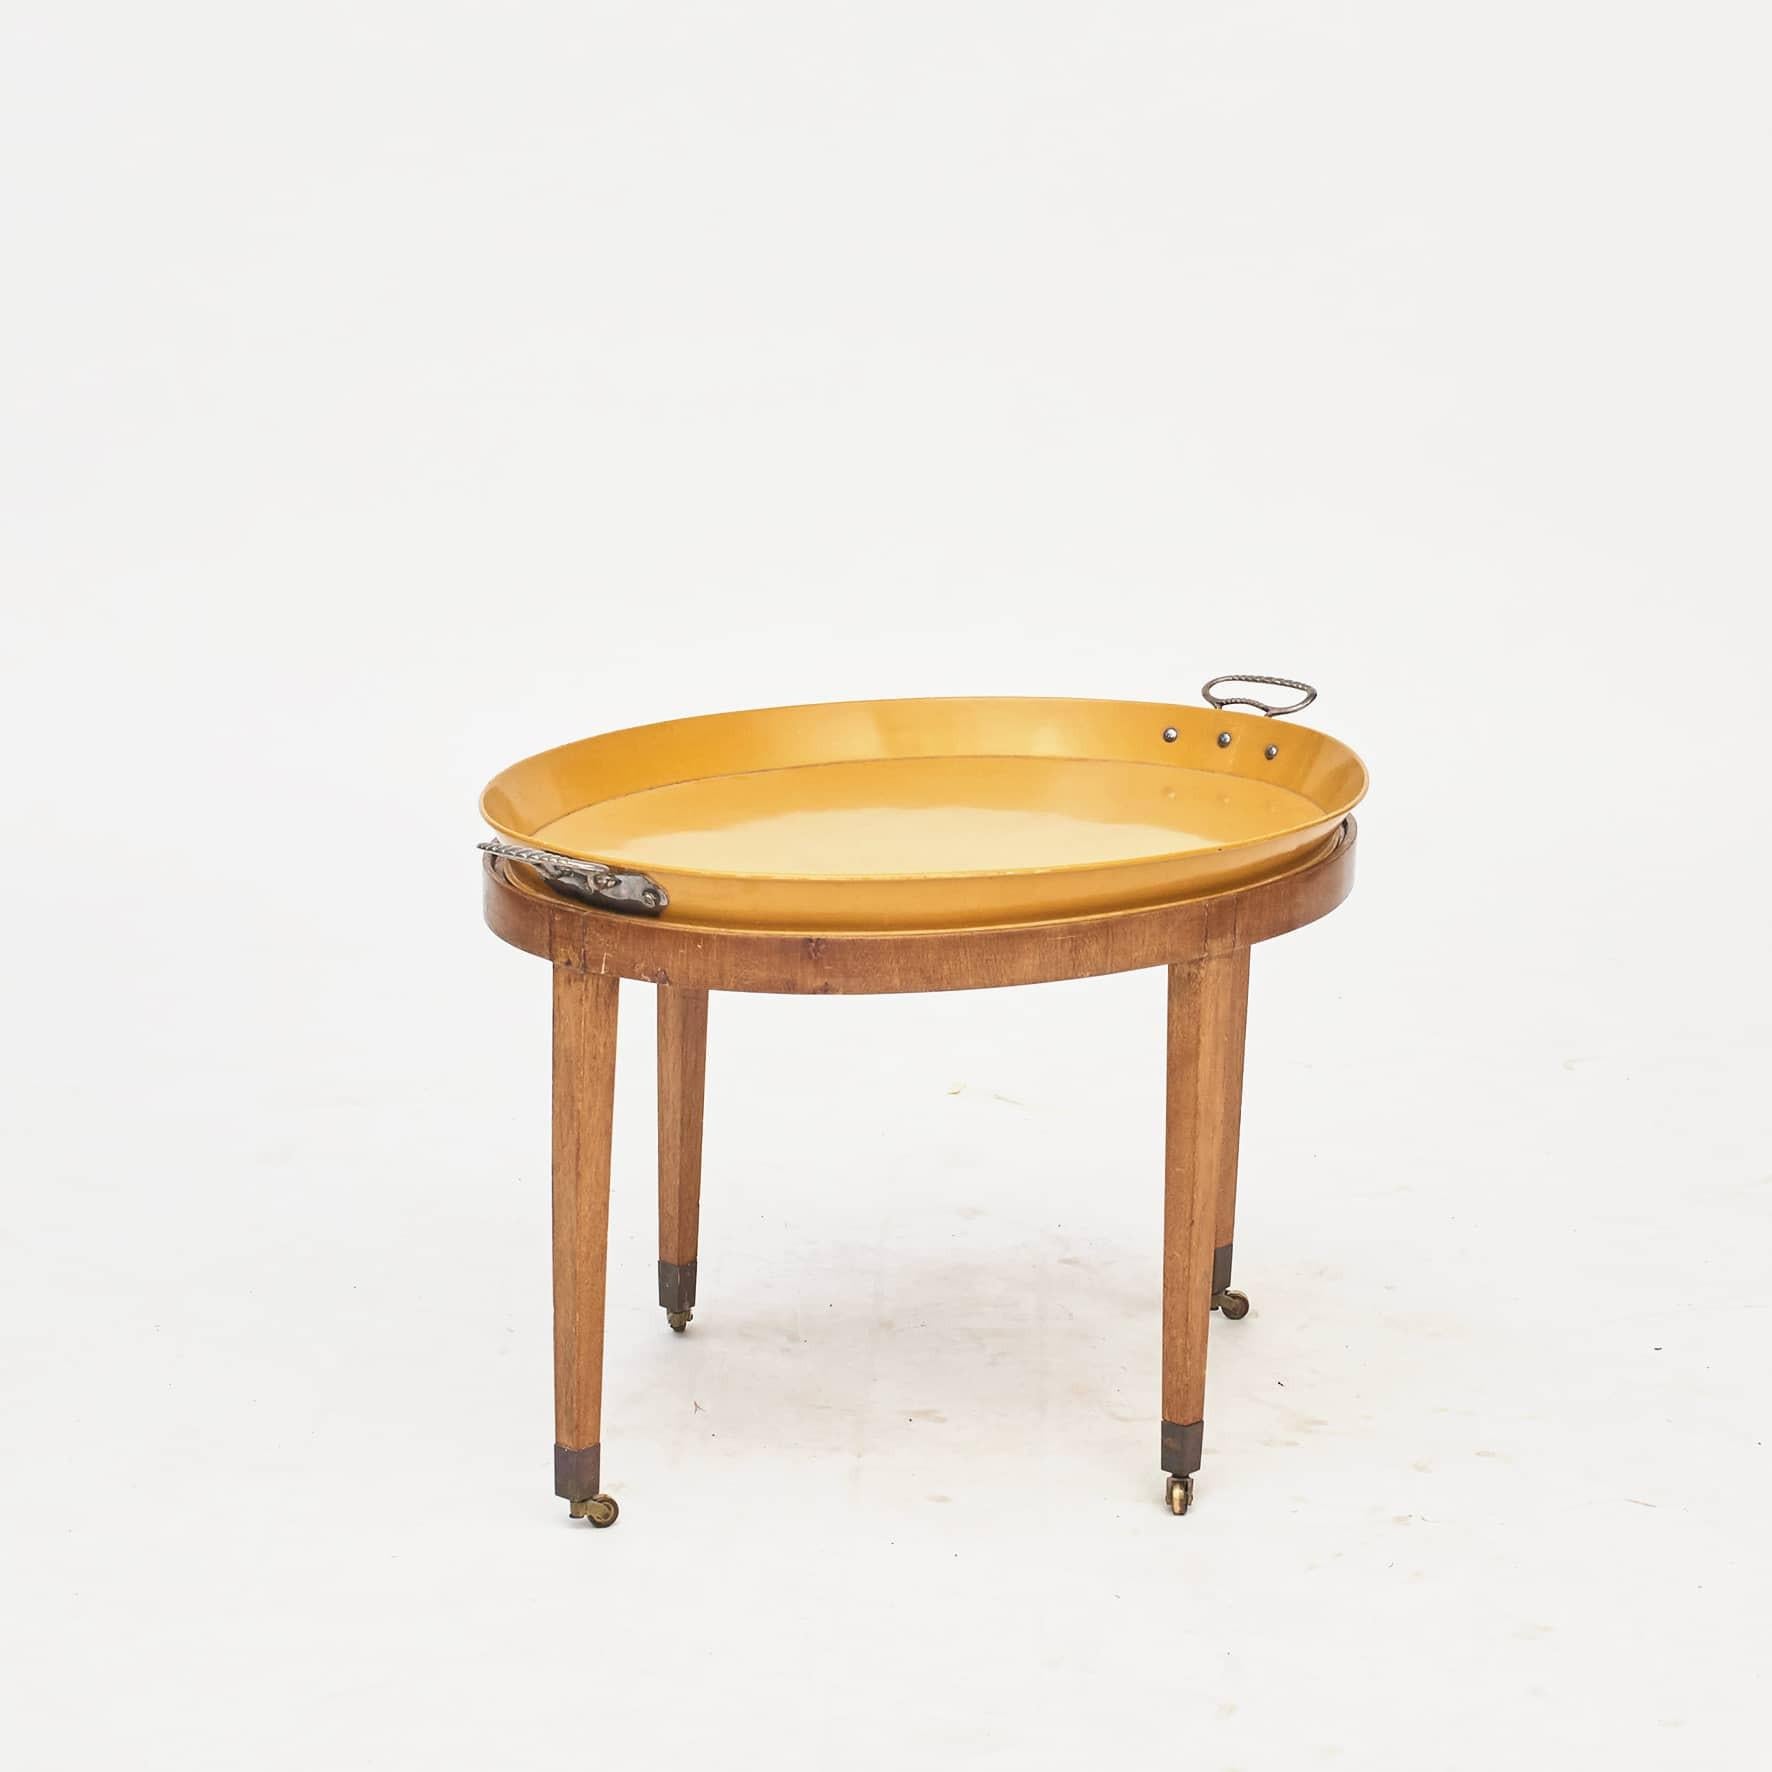 Large Danish empire tray table.
Tray in yellow-painted metal with silver-plated carrying handles.
On later mahogany base with tapered legs ending in brass feet and casters.

Original condition with age-related patina.
Denmark 1810-1820.